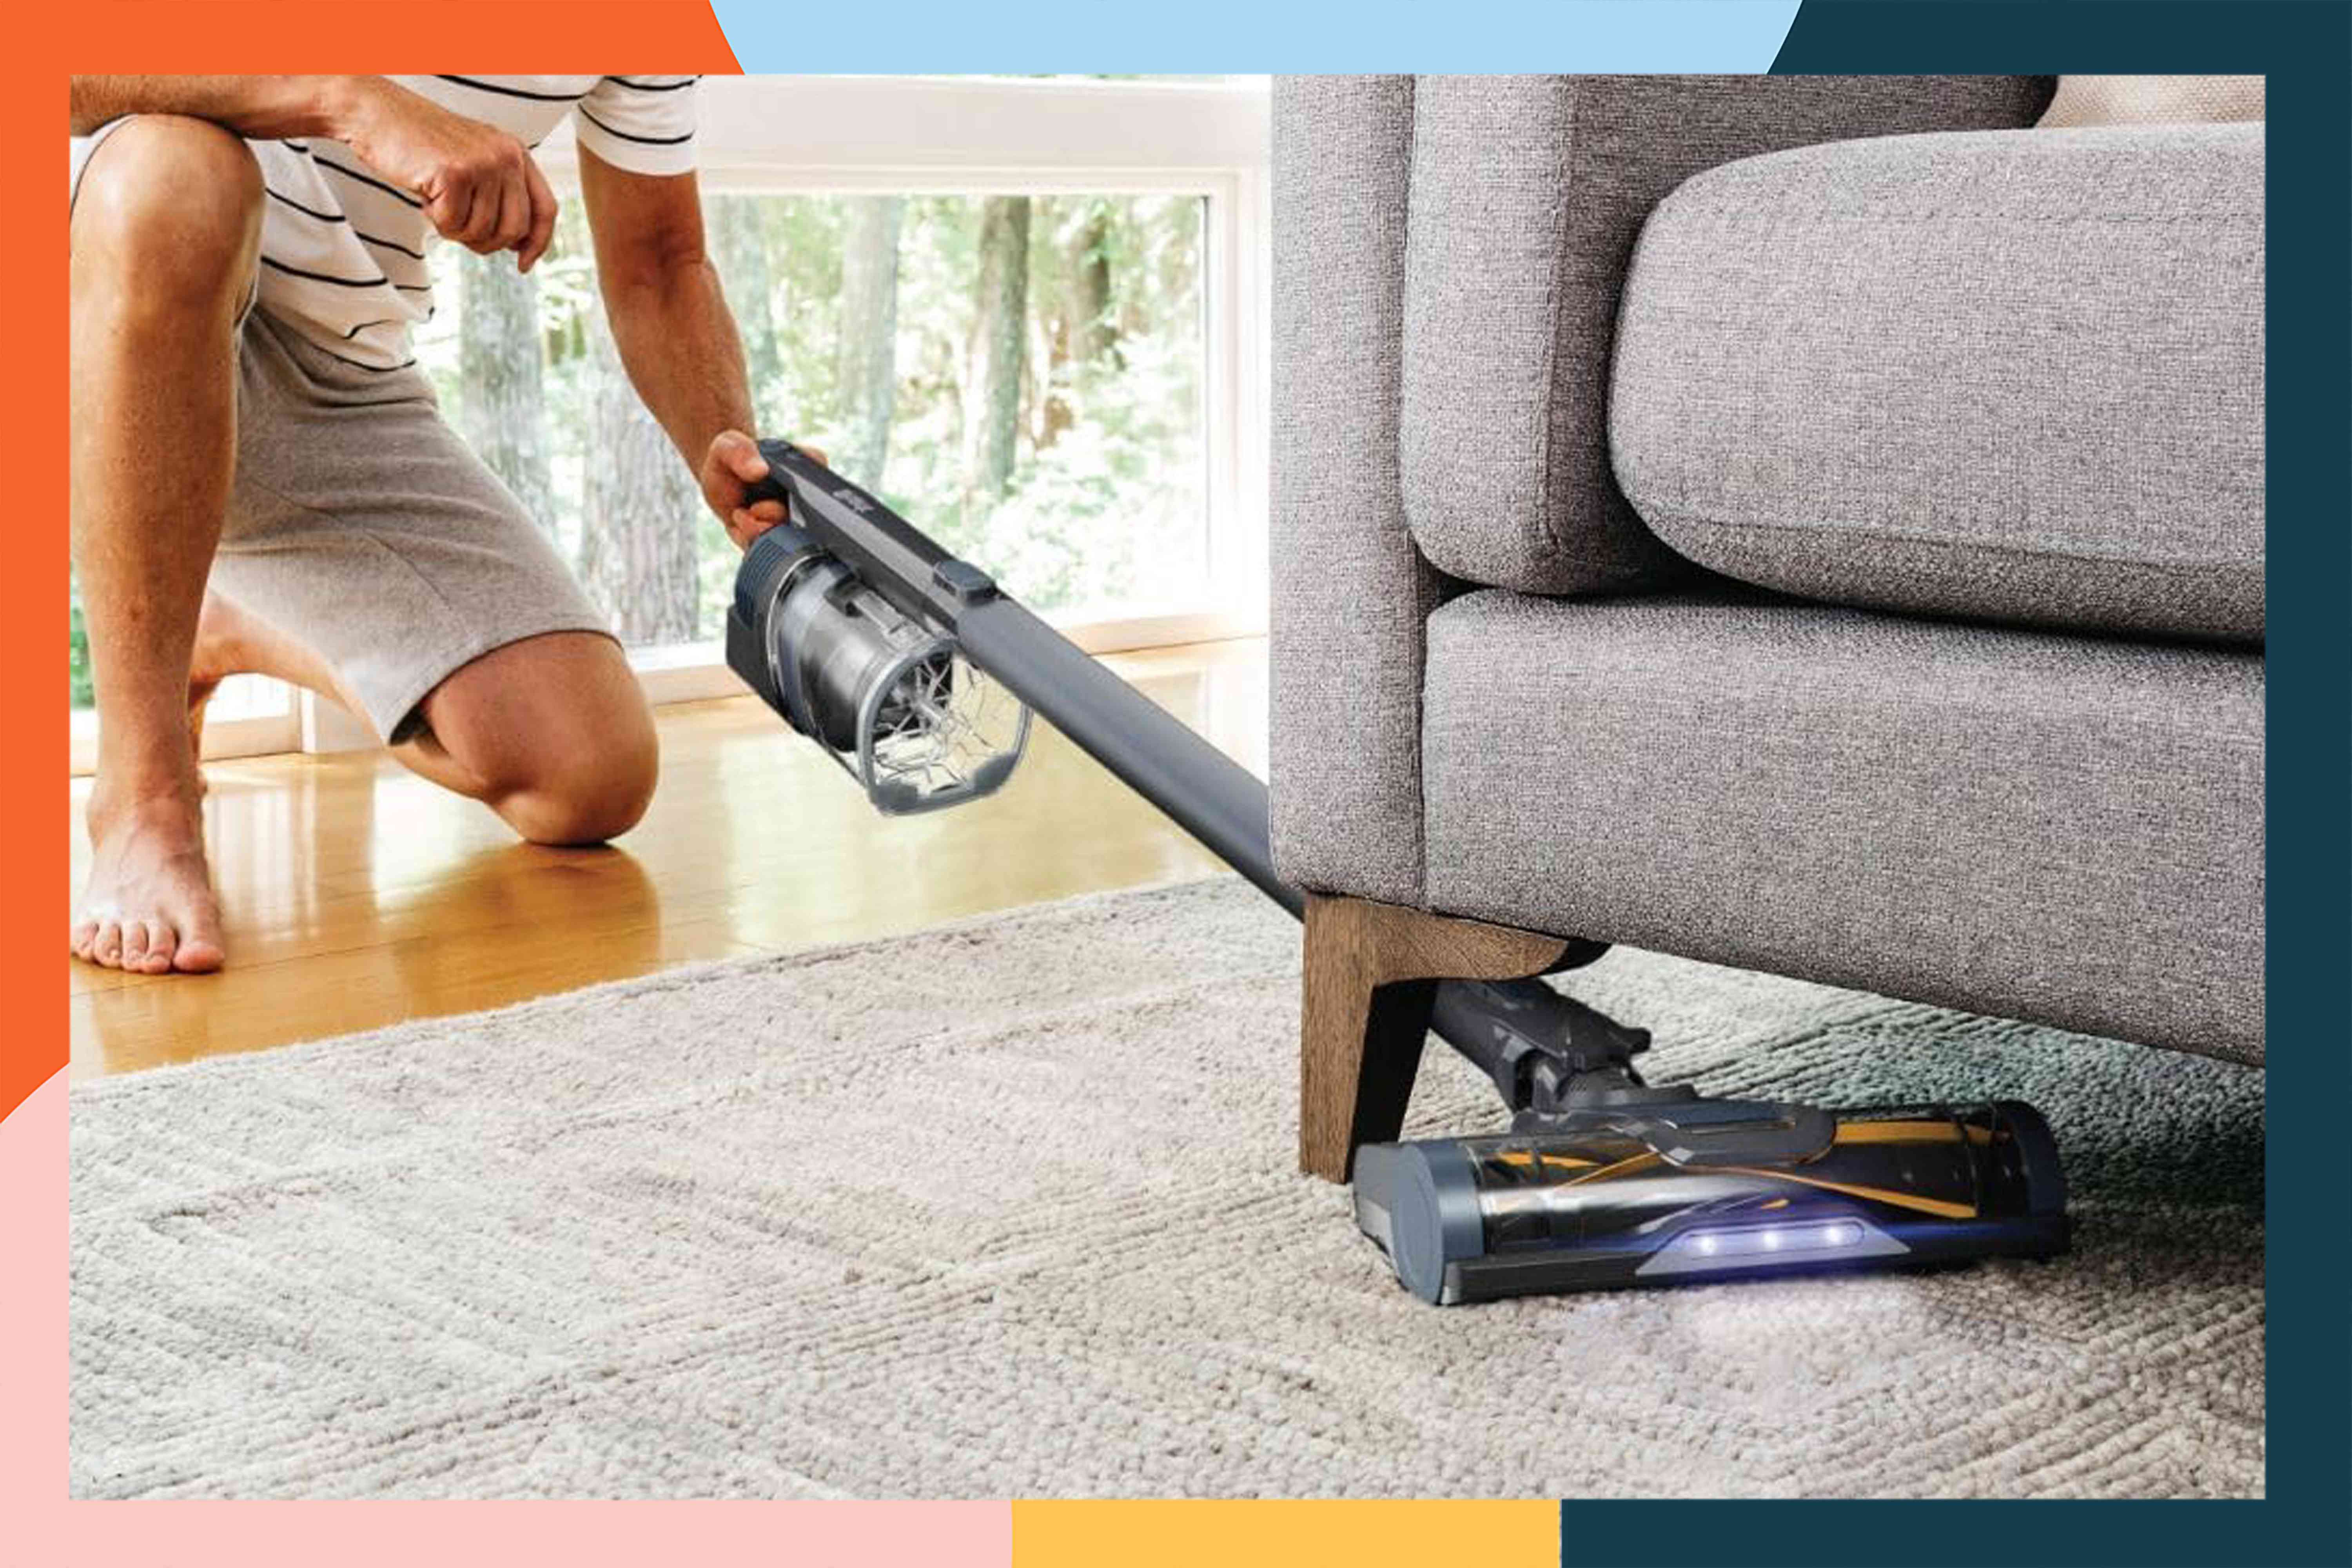 This 2-in-1 Shark Vacuum Is Down to the Lowest Price We’ve Seen This Year Ahead of Amazon Prime Day